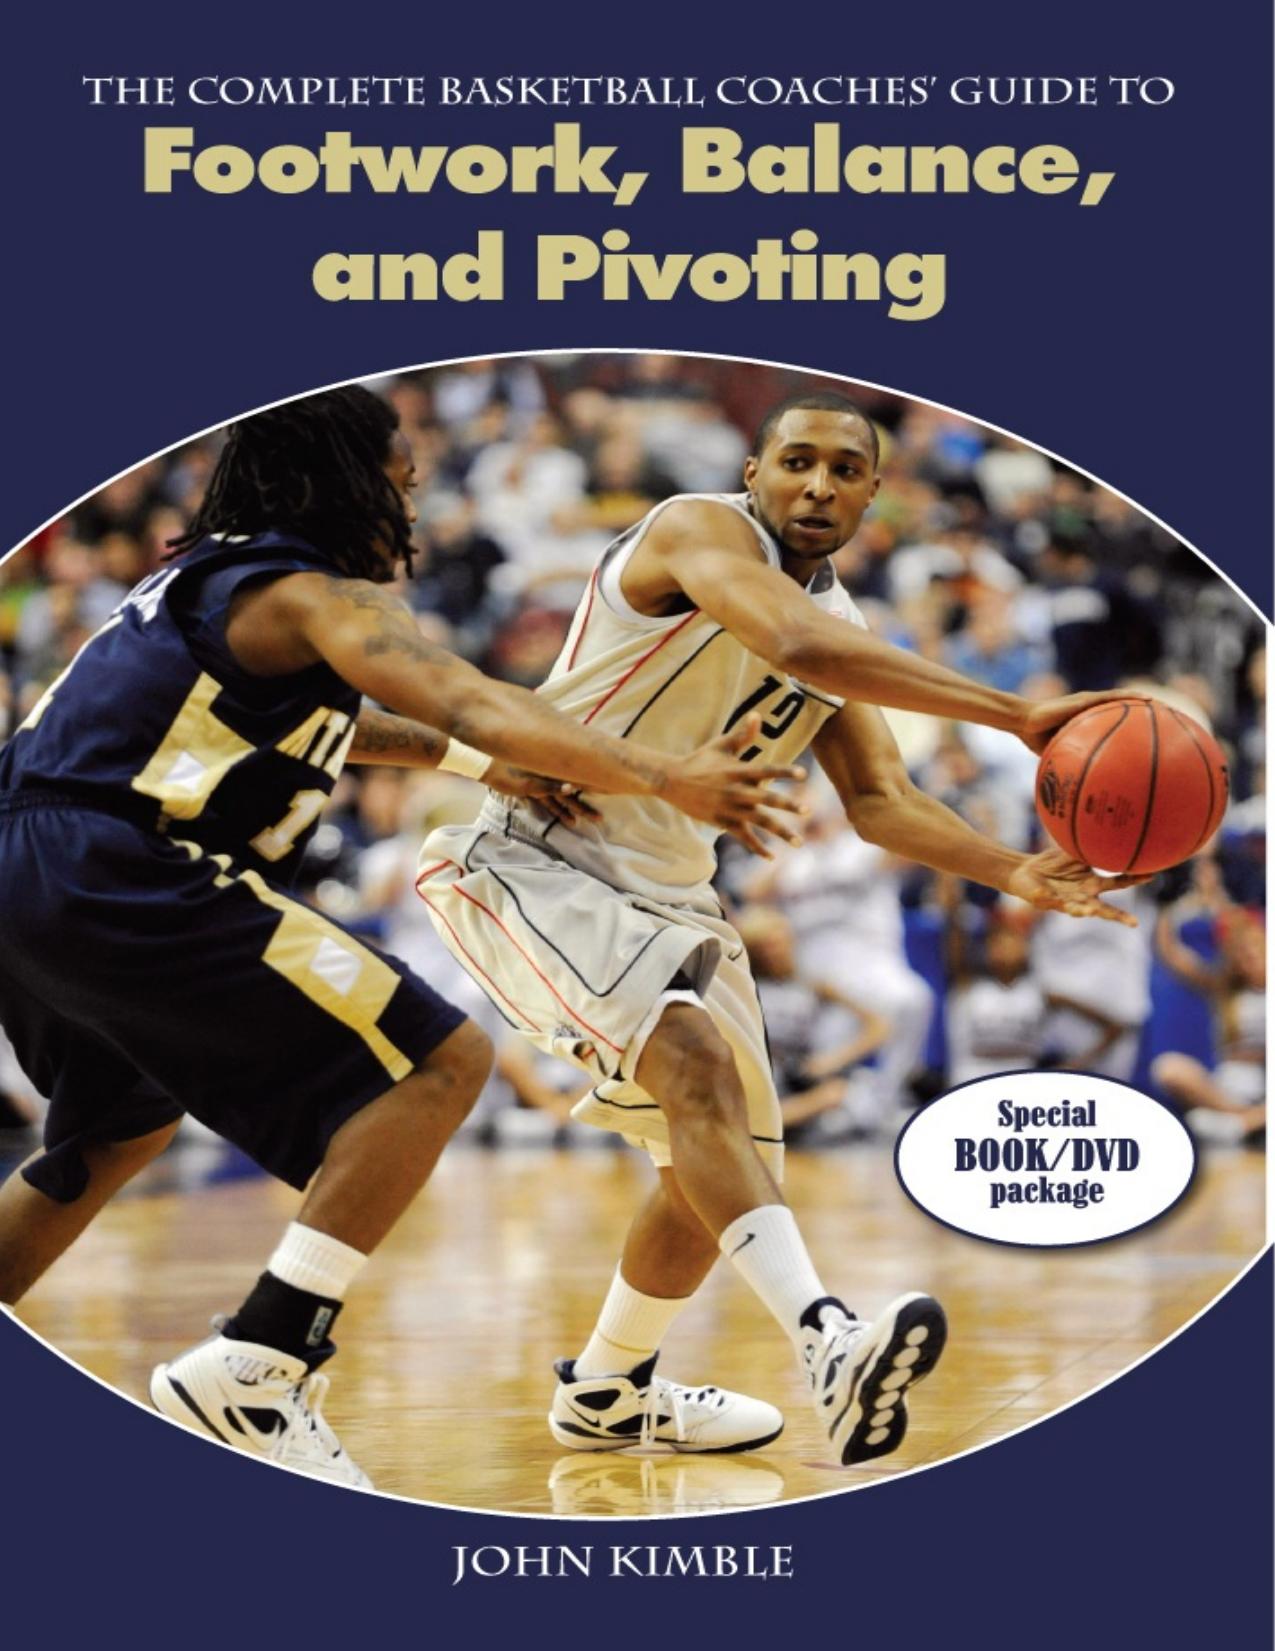 The Complete Basketball Coaches Guide to Footwork, Balance, and Pivoting - PDFDrive.com